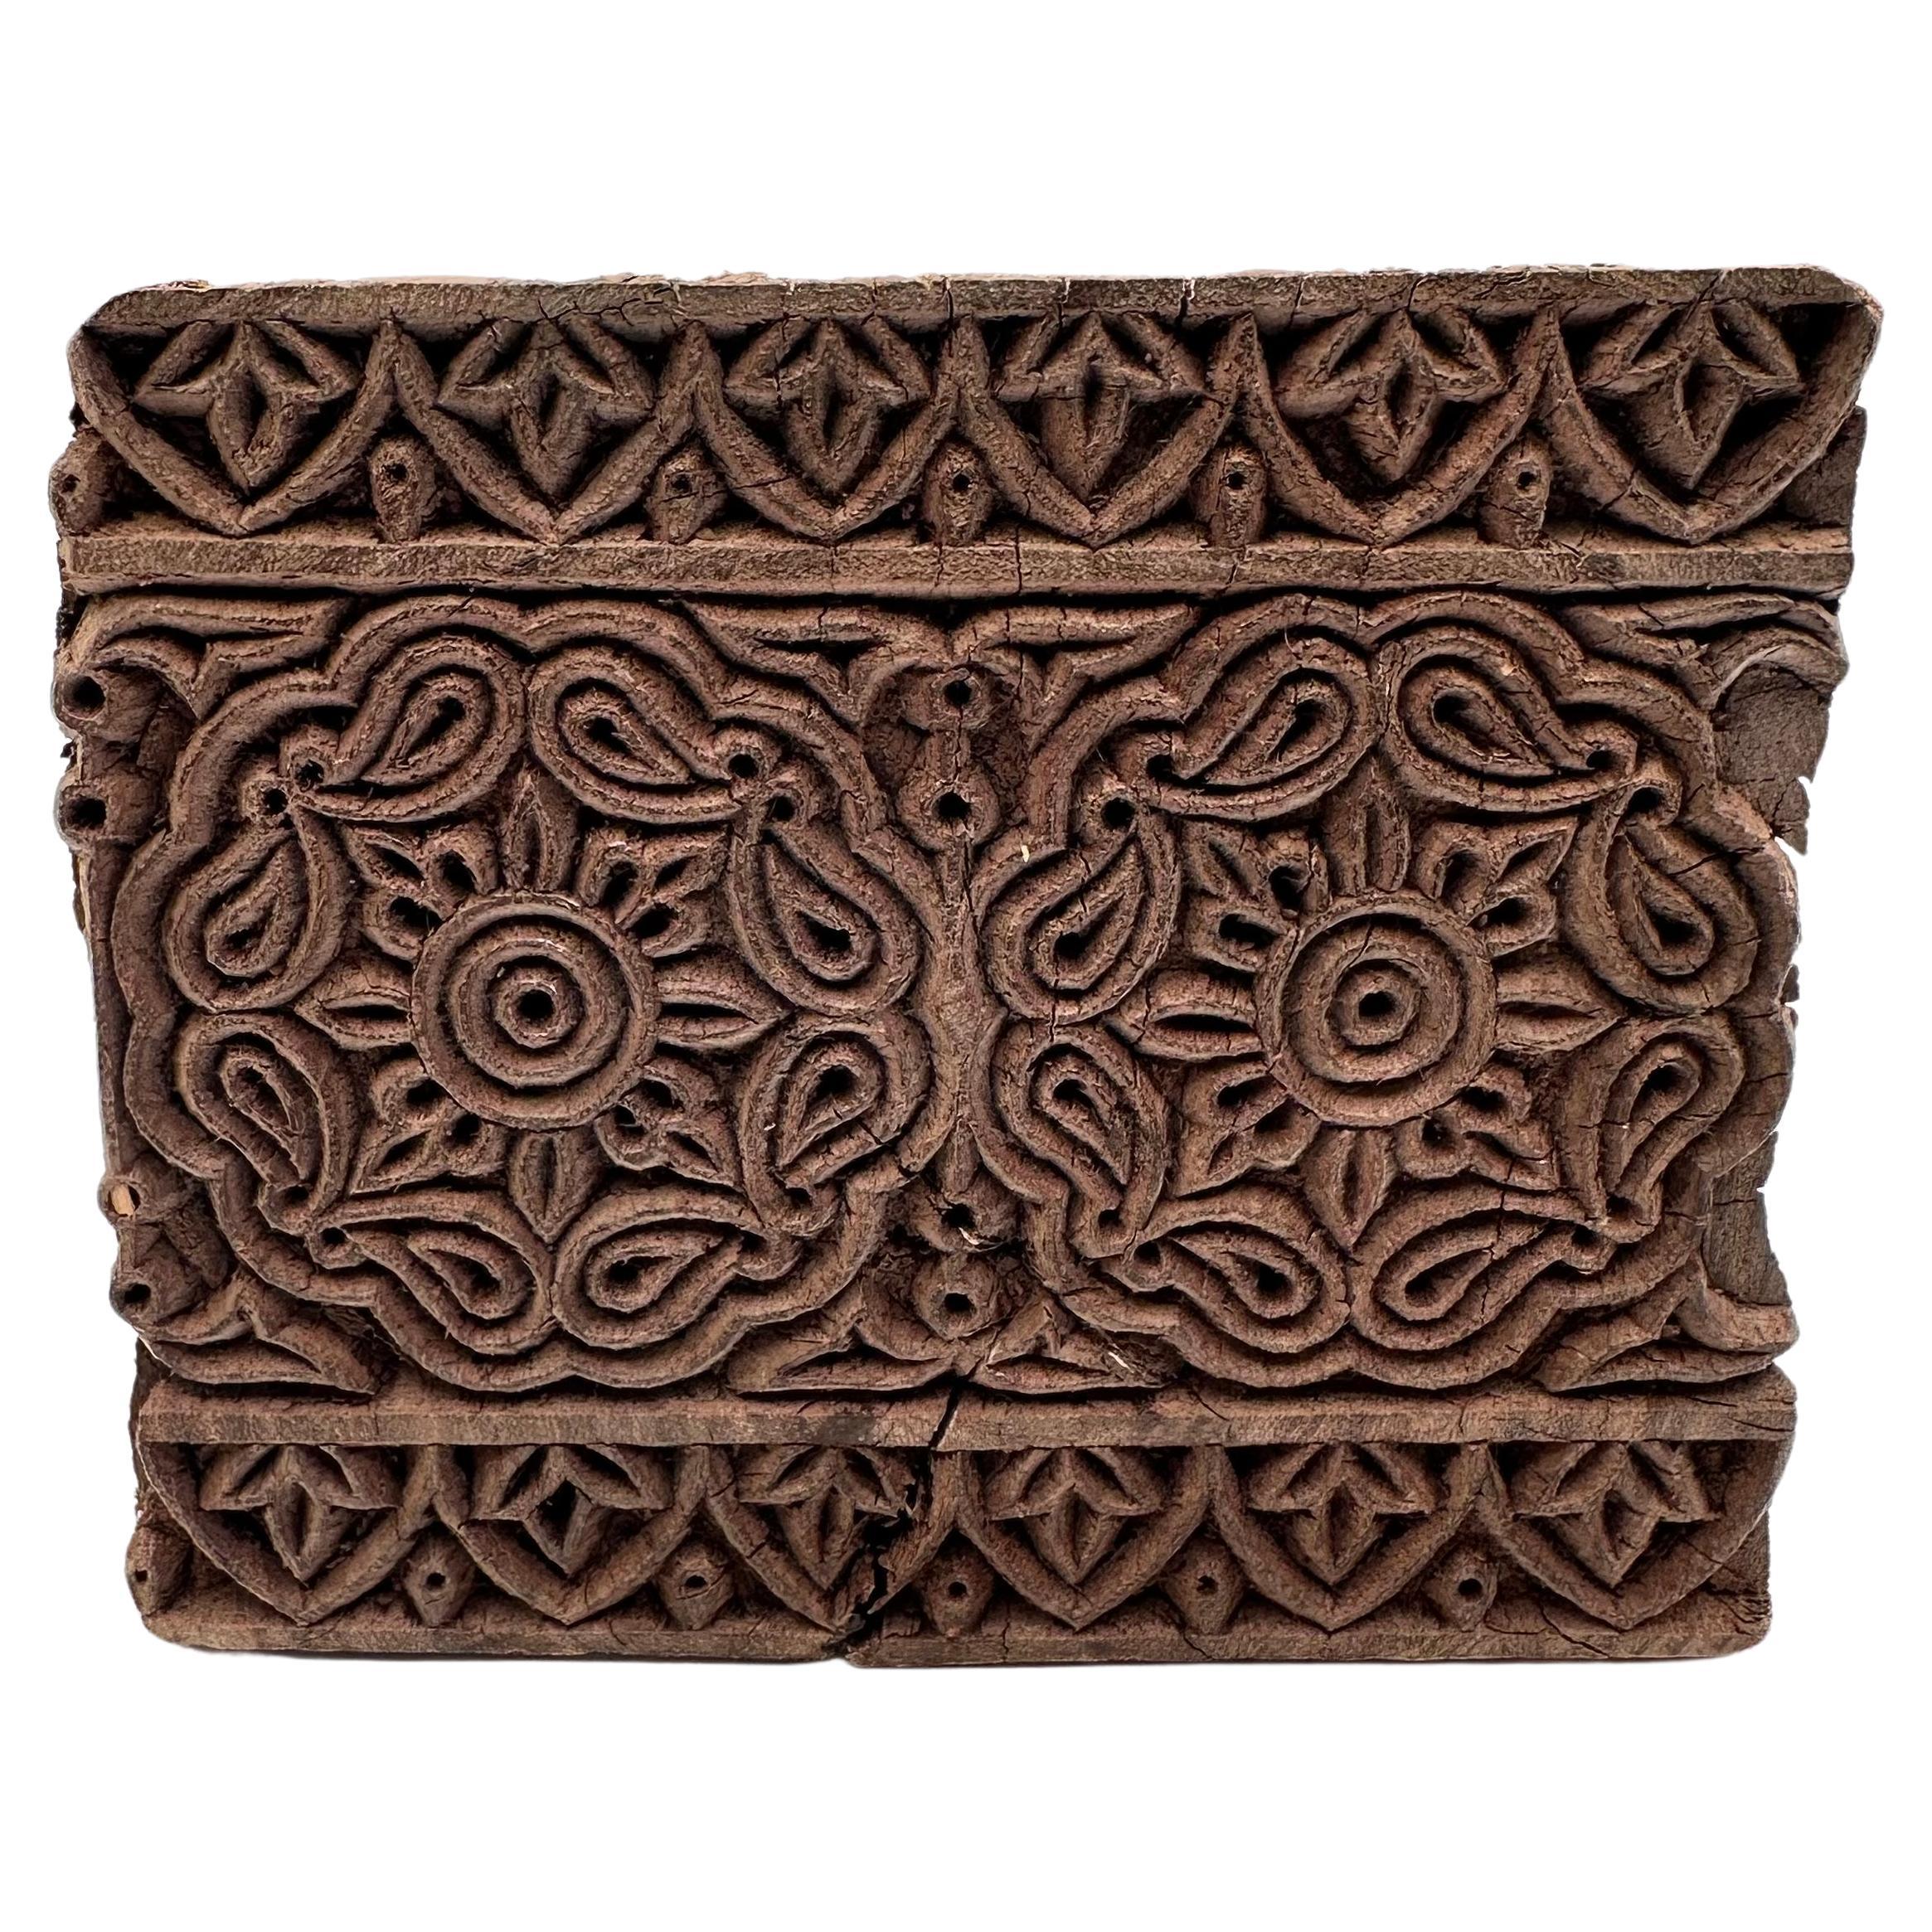 Antique Hand Carved Wood Printing Block with Large Rosettes For Sale